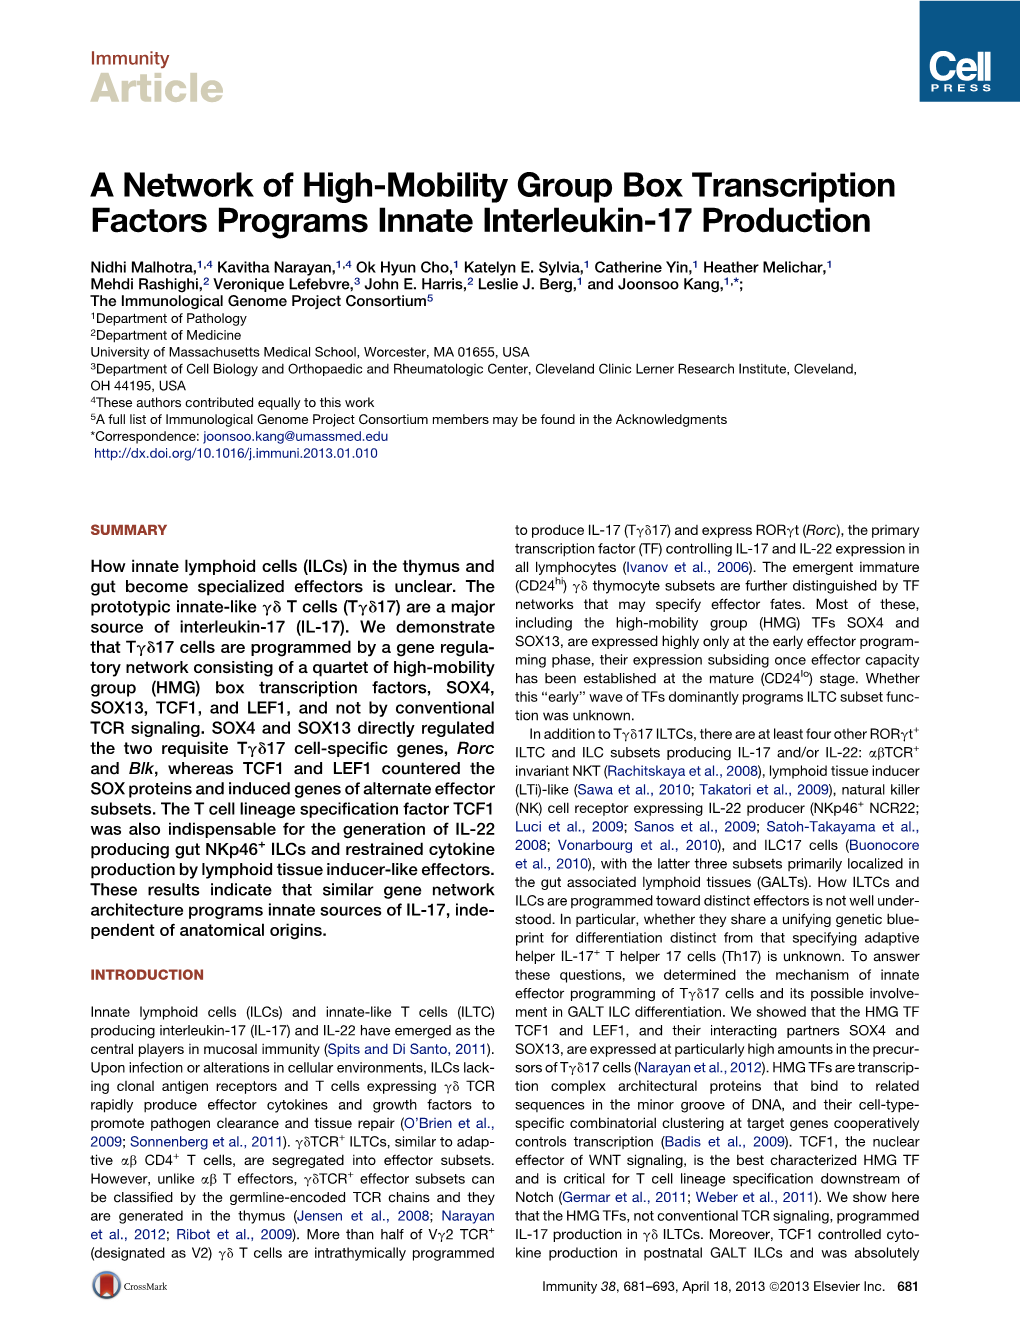 A Network of High-Mobility Group Box Transcription Factors Programs Innate Interleukin-17 Production